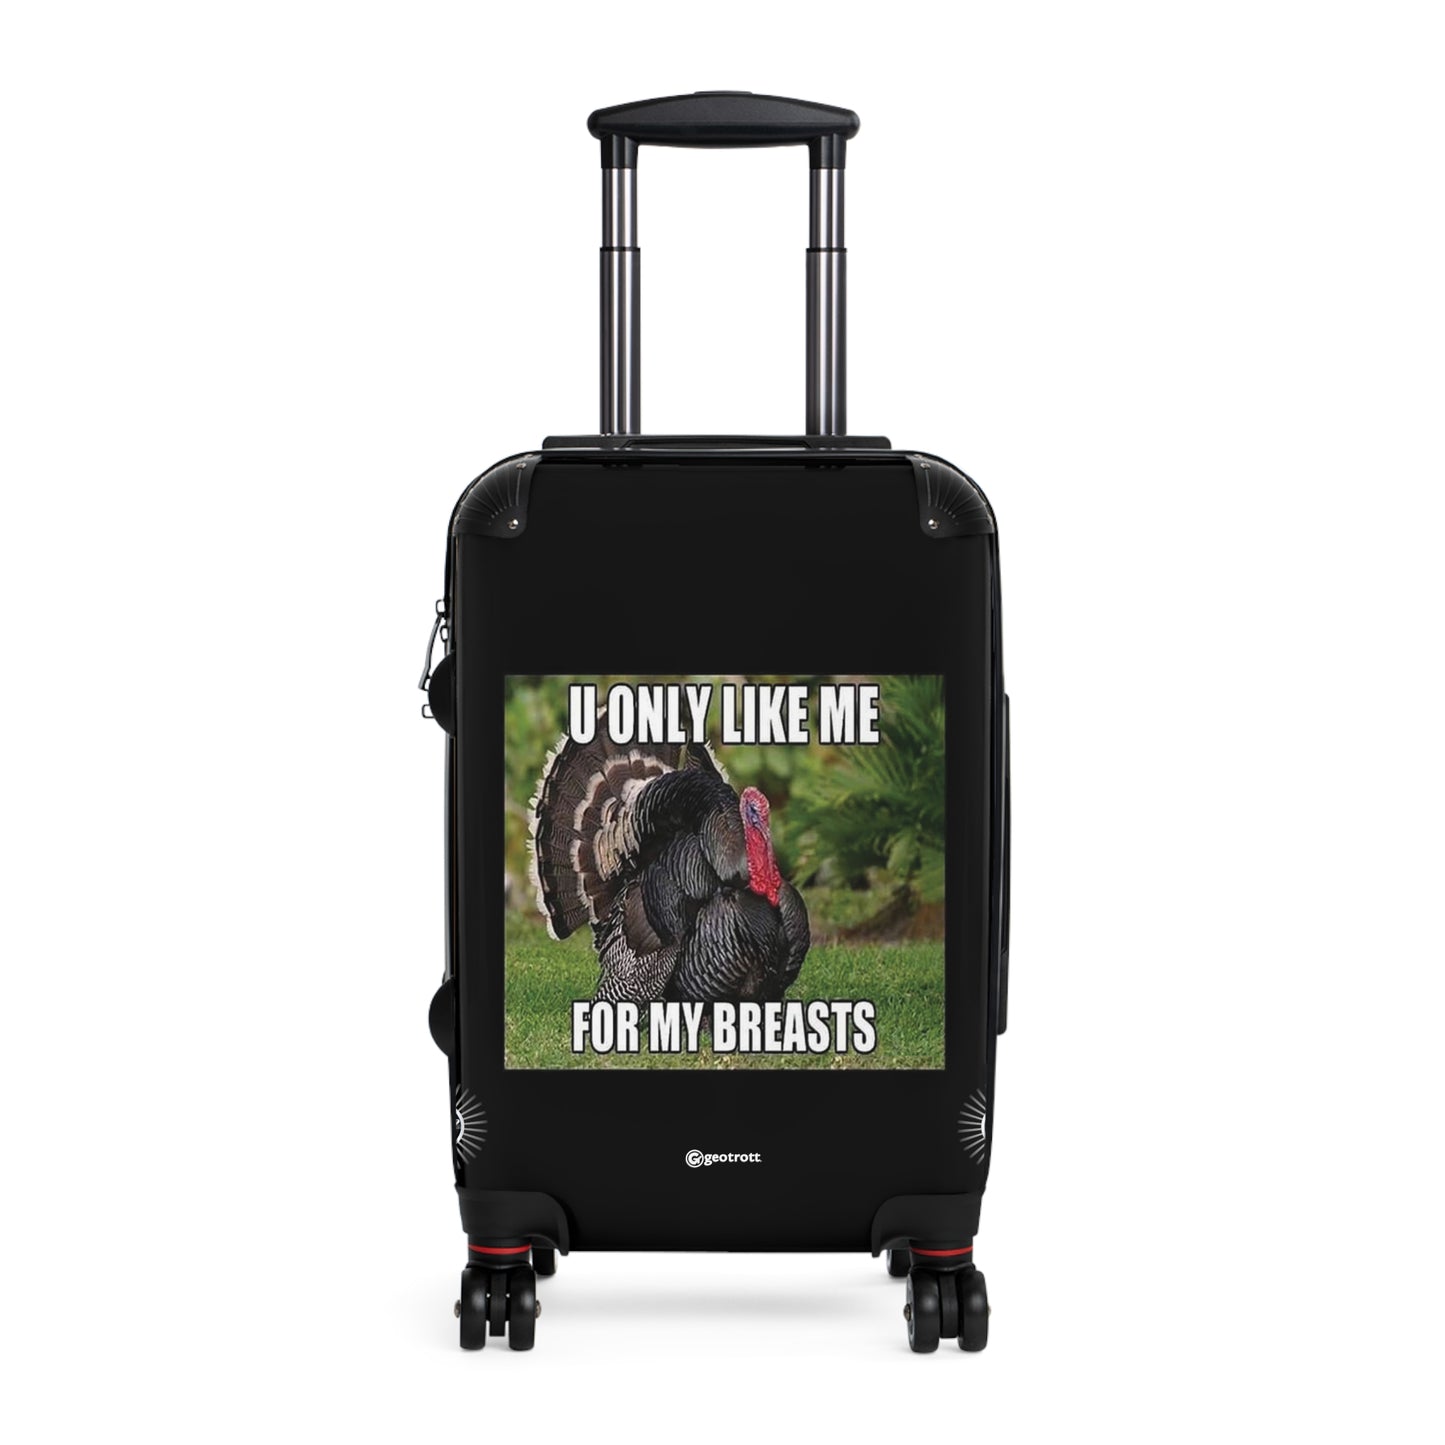 U Only Like Me For My Breasts Thanksgiving MEME Funny Inspirational Luggage Bag Rolling Suitcase Travel Accessories